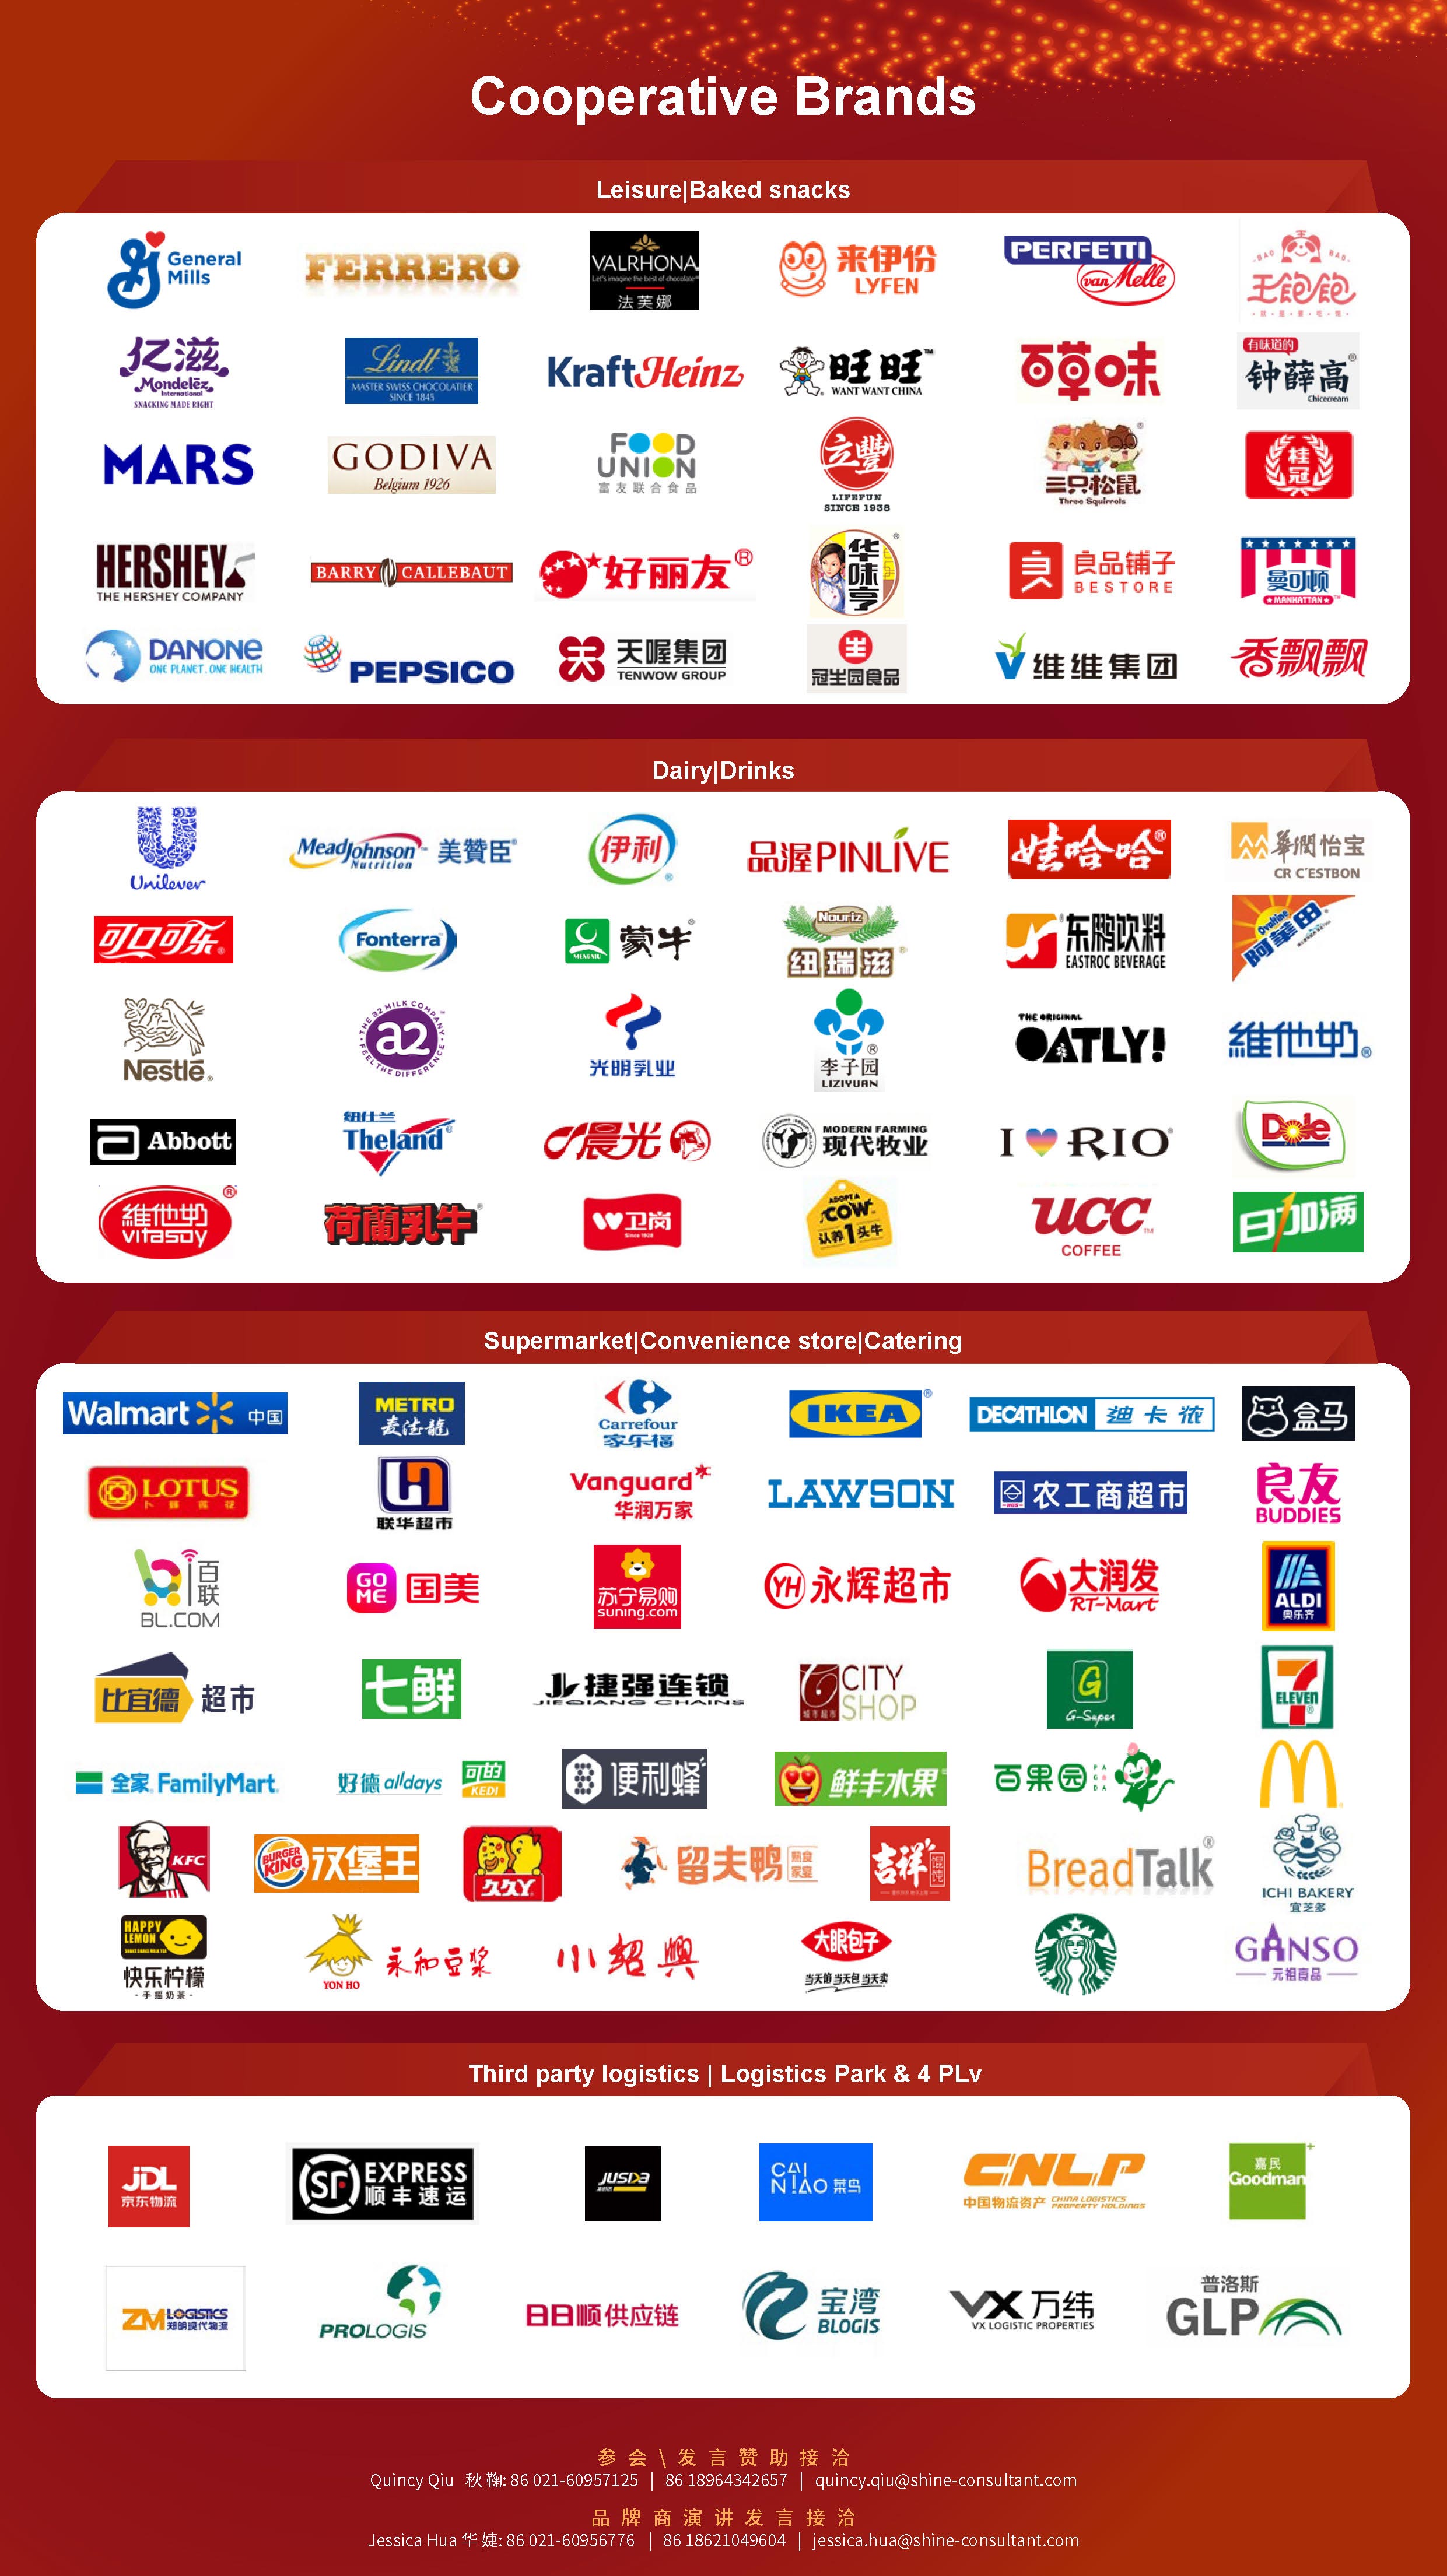 The 7th China Consumer Goods Supply Chain & logistic & Warehouse Congress